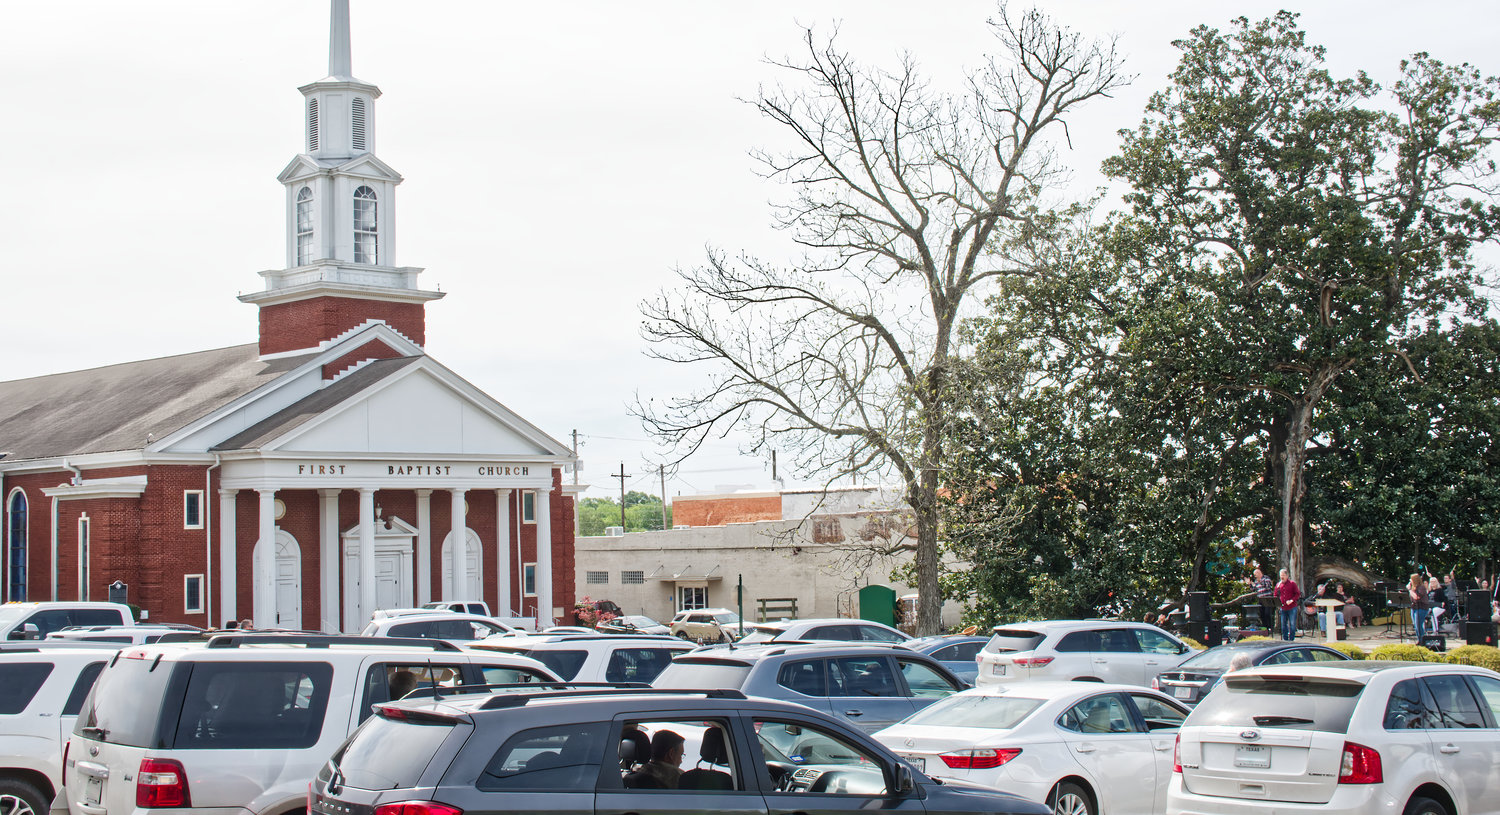 Dozens of churchgoers gathered in the parking lot across from their usual meeting place at the First Baptist Church in Mineola on Sunday, March 29, practicing social distancing while singing from their vehicles, led by an amplified praise team at Peterson Park.